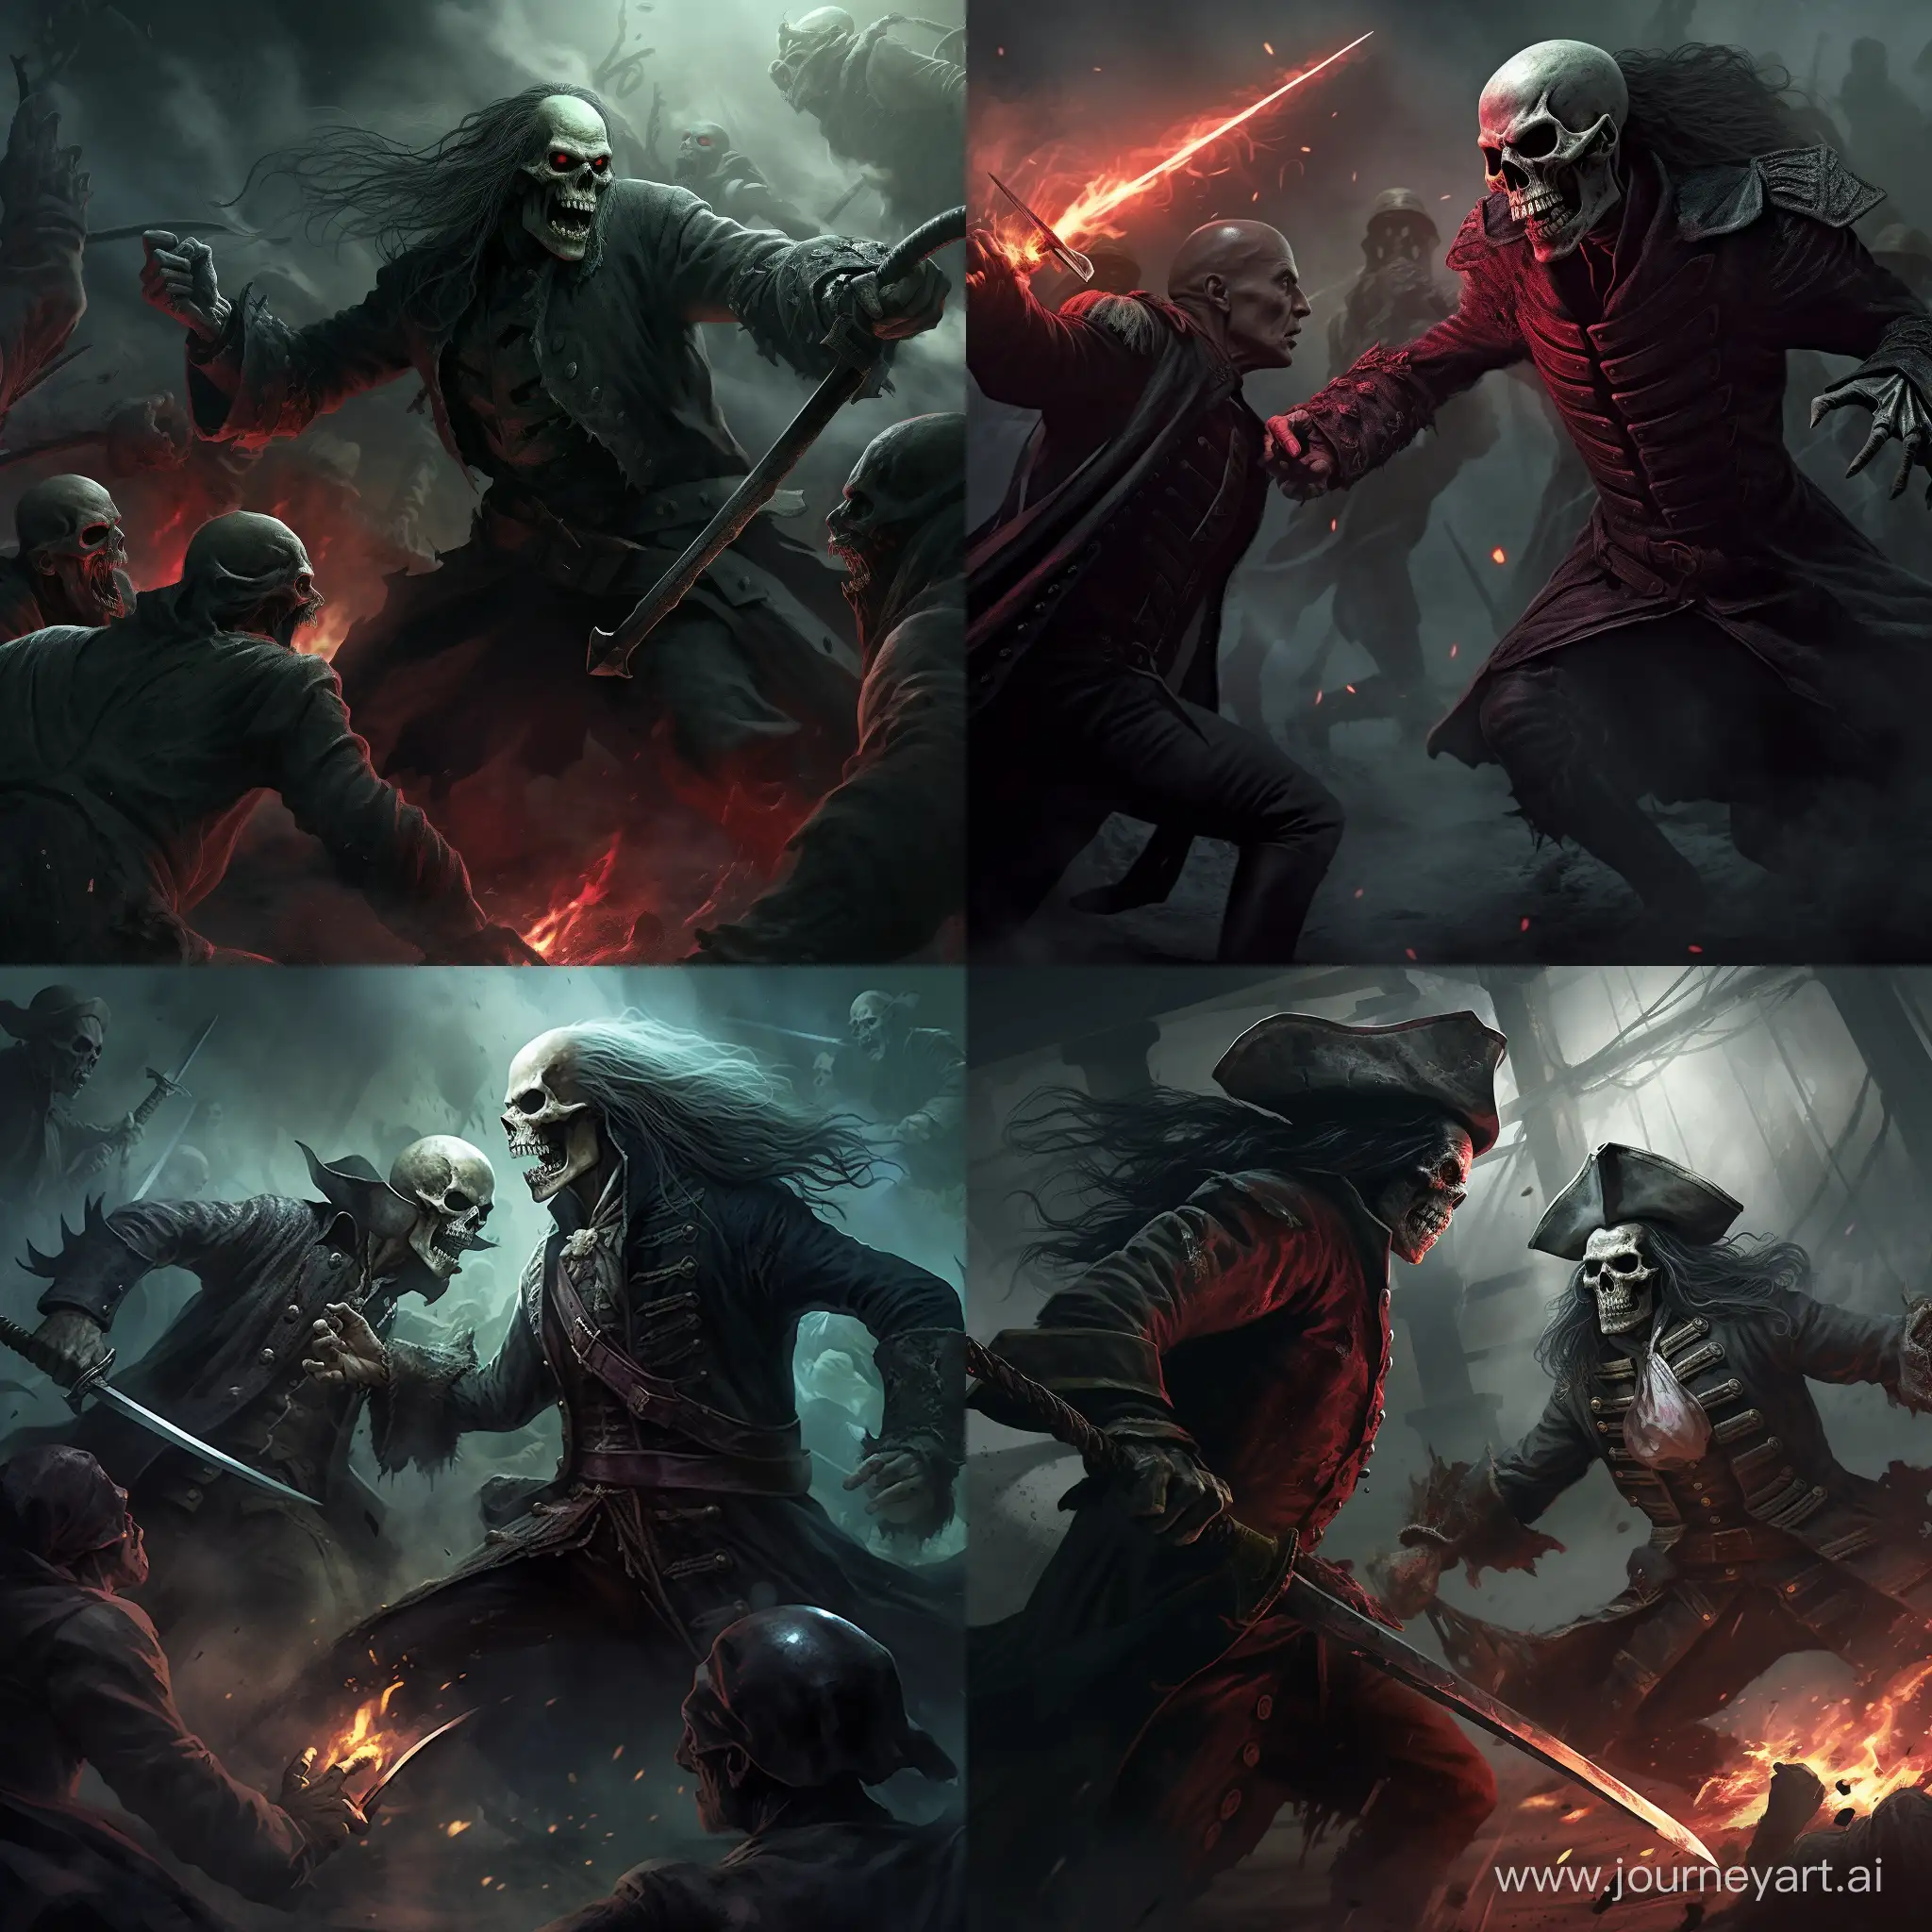 Epic-Battle-Pirates-of-the-Caribbean-vs-Lord-Voldemort